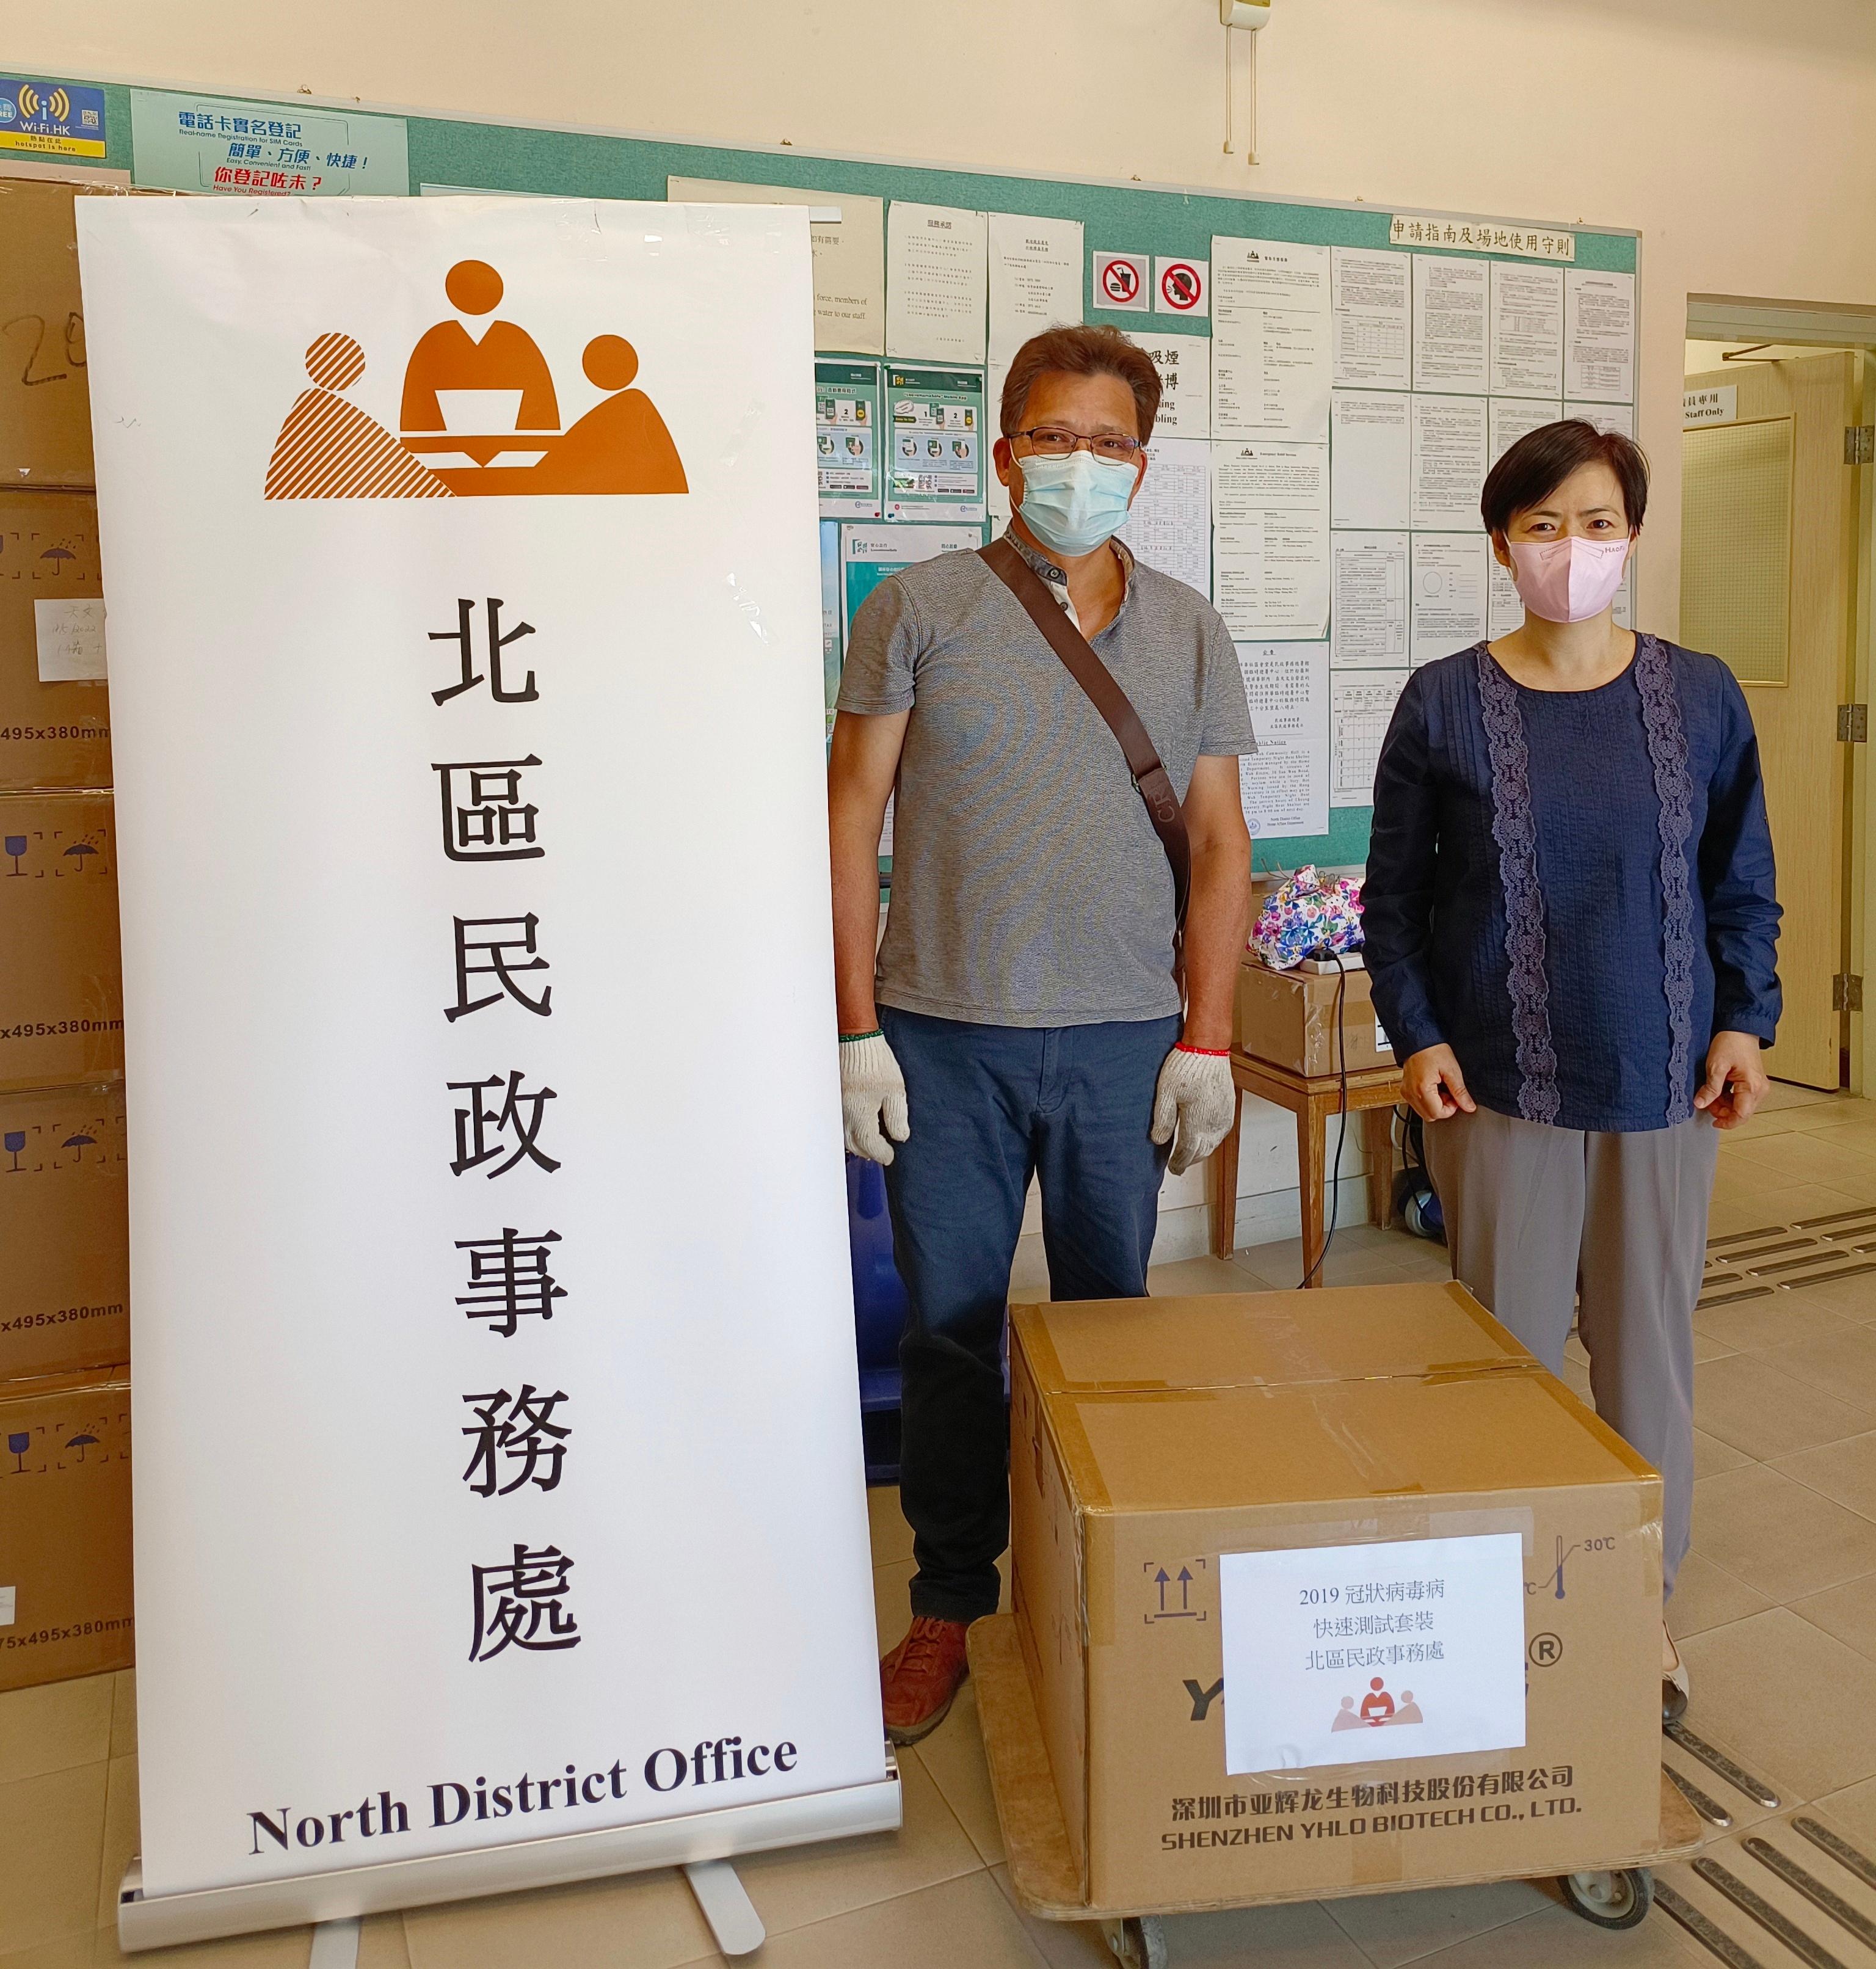 The North District Office today (May 18) distributed COVID-19 rapid test kits to households, cleansing workers and property management staff living and working in San Wah Bank Building for voluntary testing through the property management company.